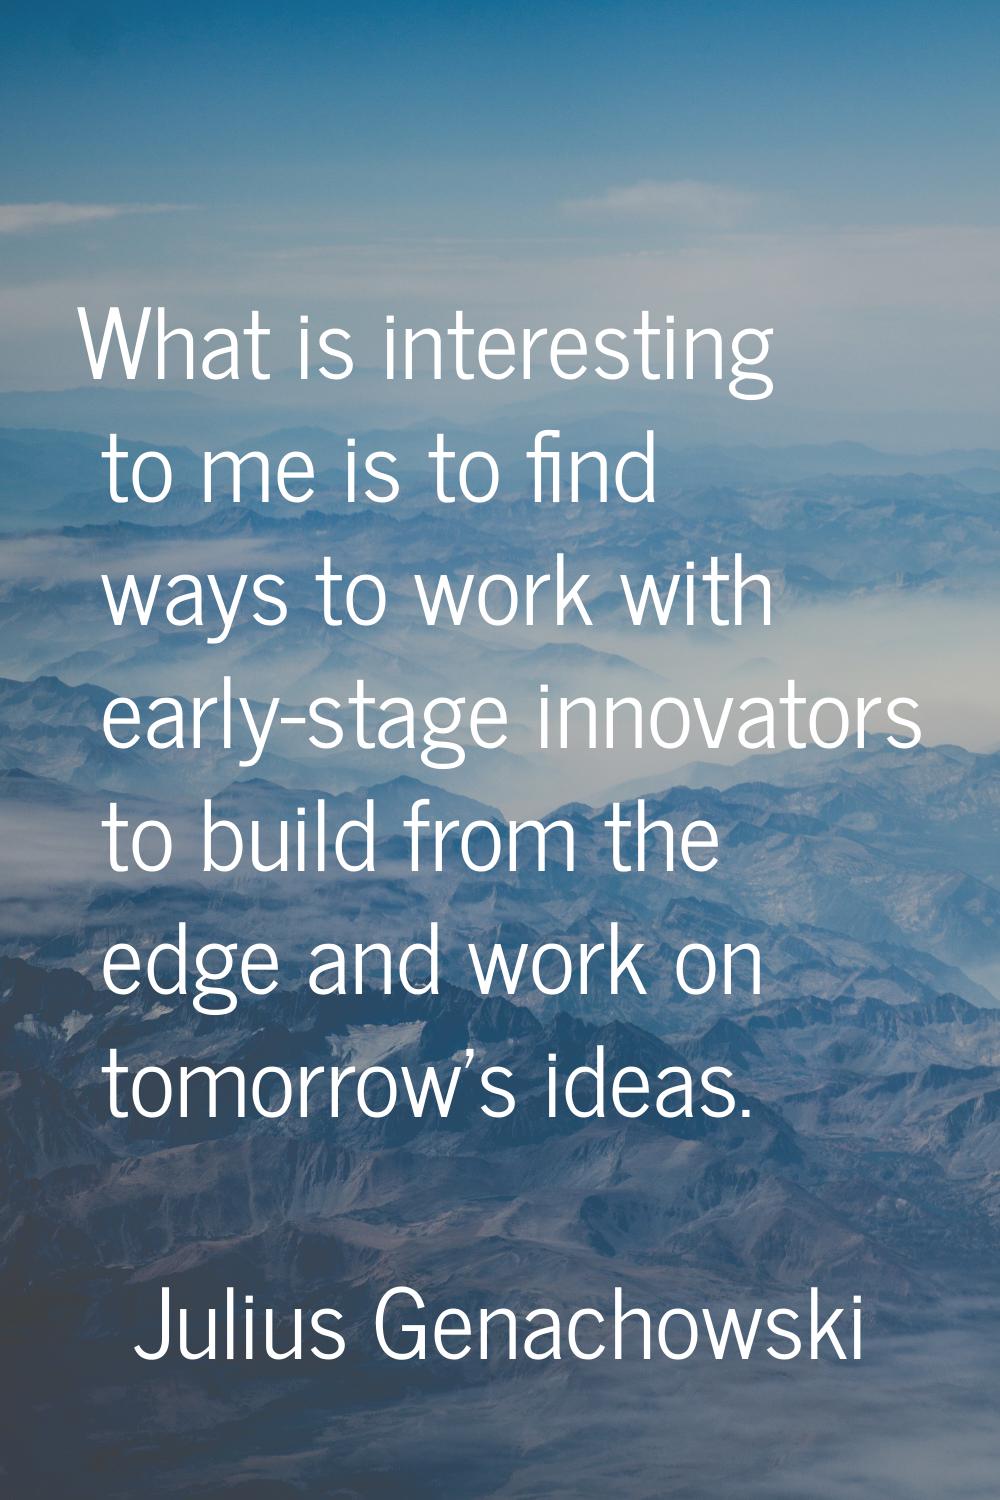 What is interesting to me is to find ways to work with early-stage innovators to build from the edg